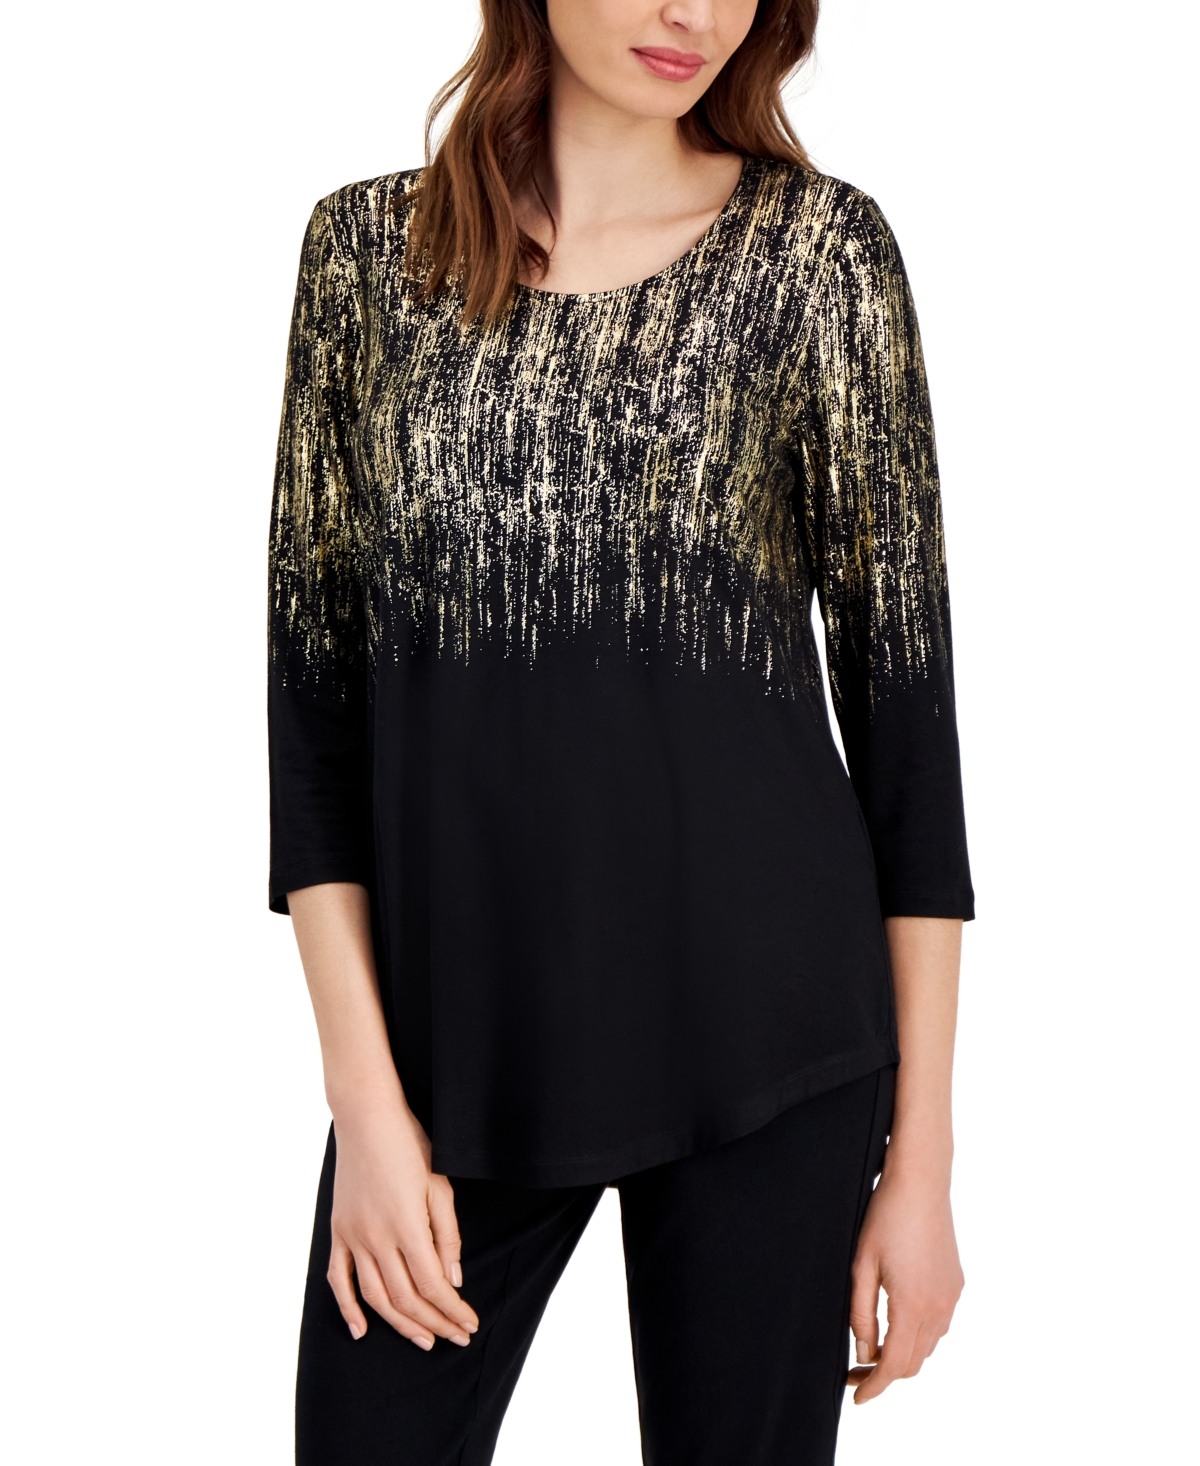 Women's Foil-Print Knit 3/4-Sleeve Top, Created for Macy's - Gold